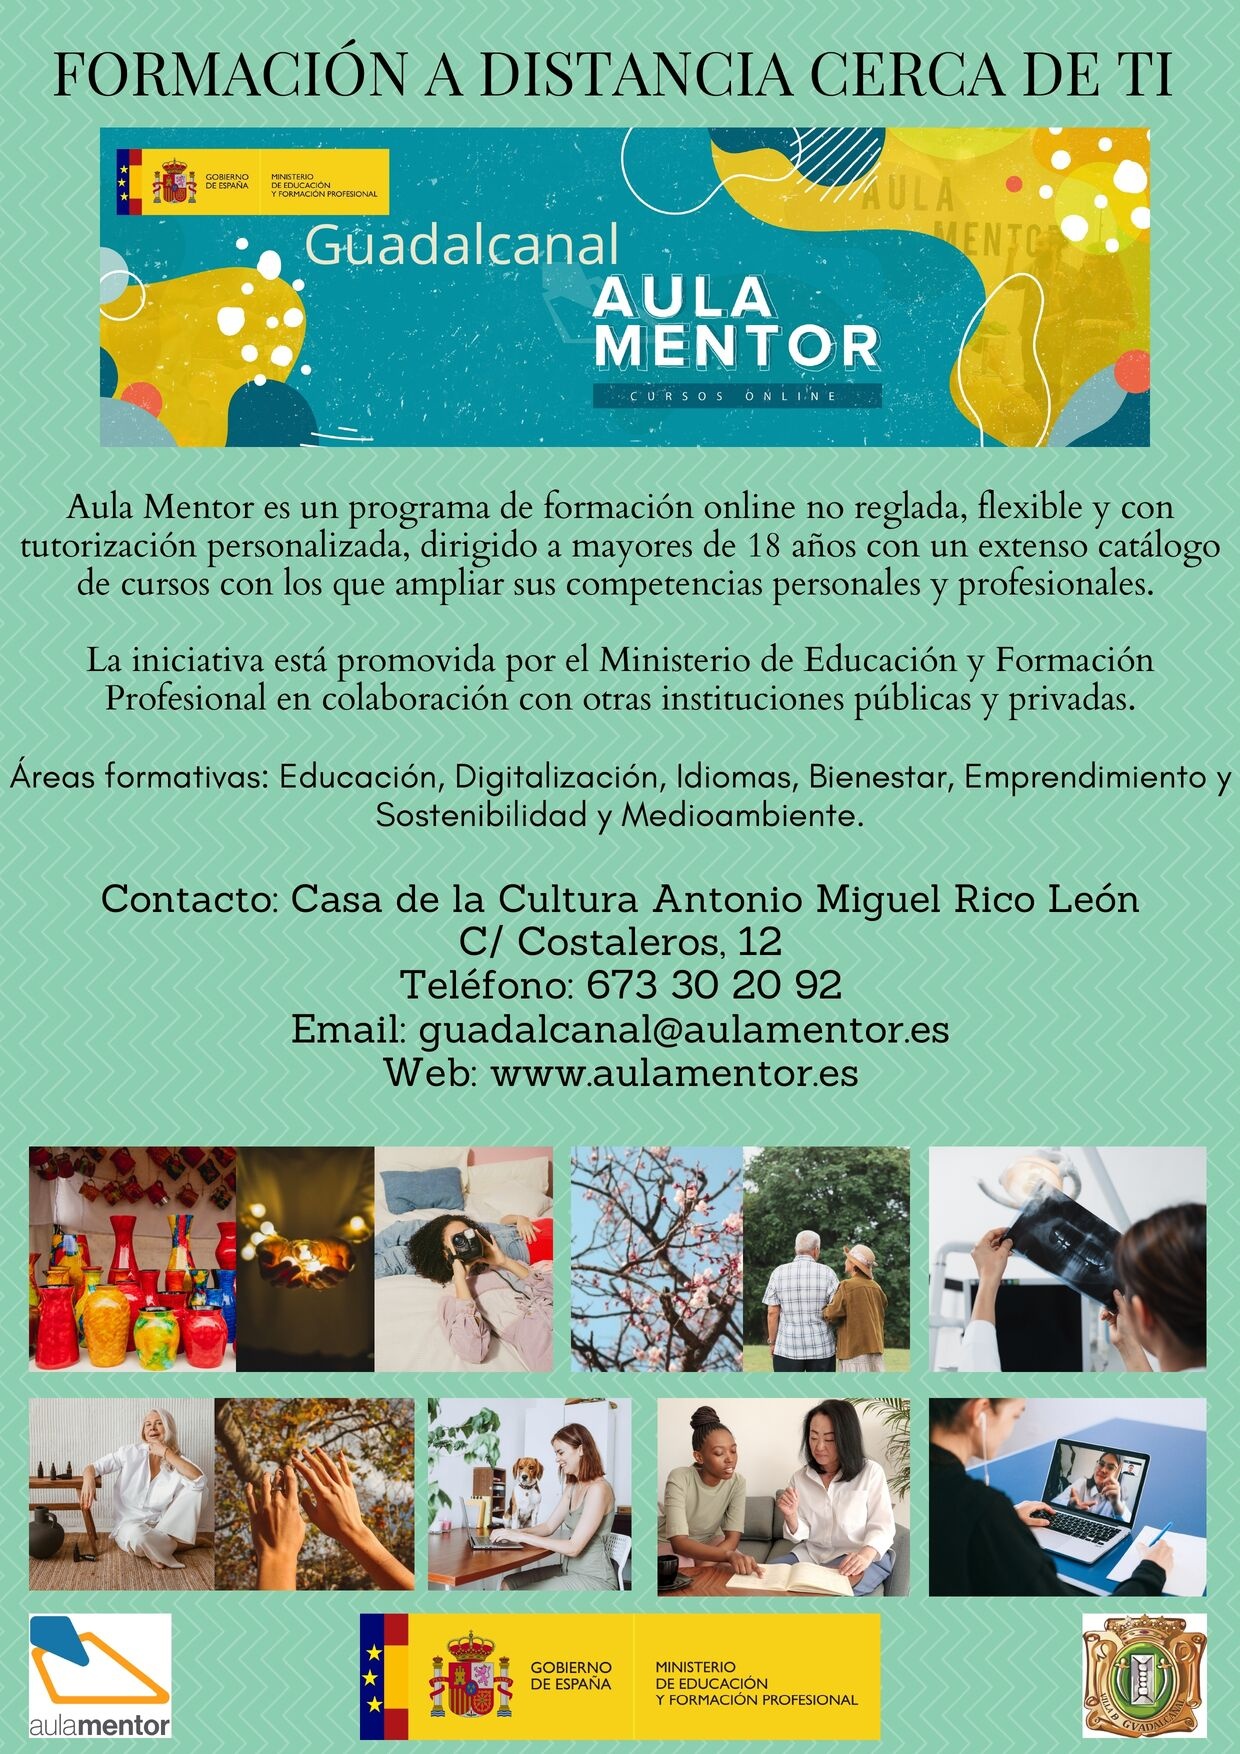 aula mentor rollup_page-0001